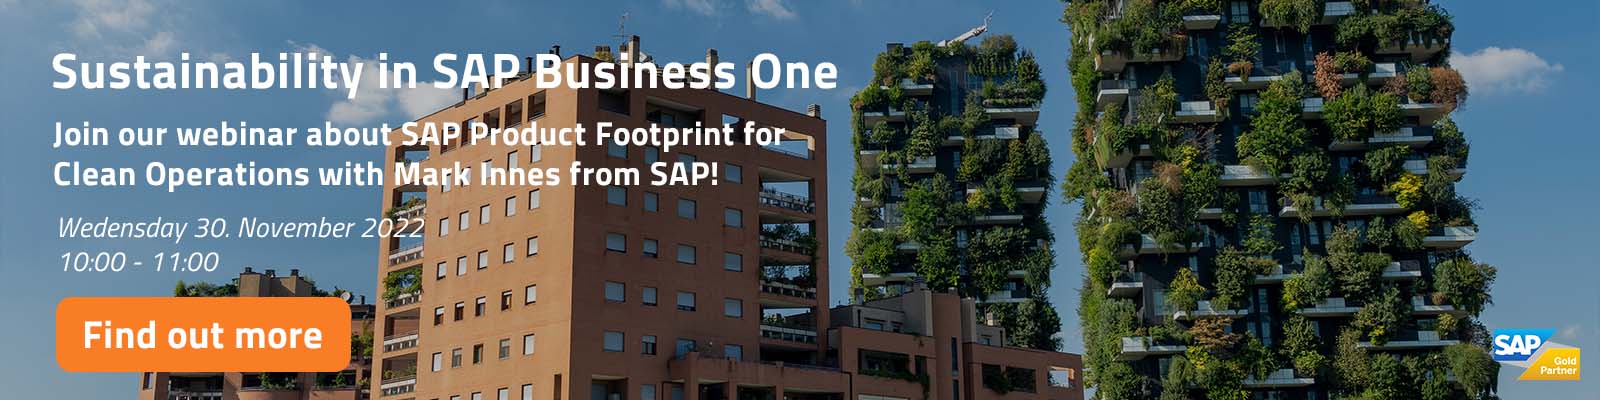 Sustainability-in-SAP